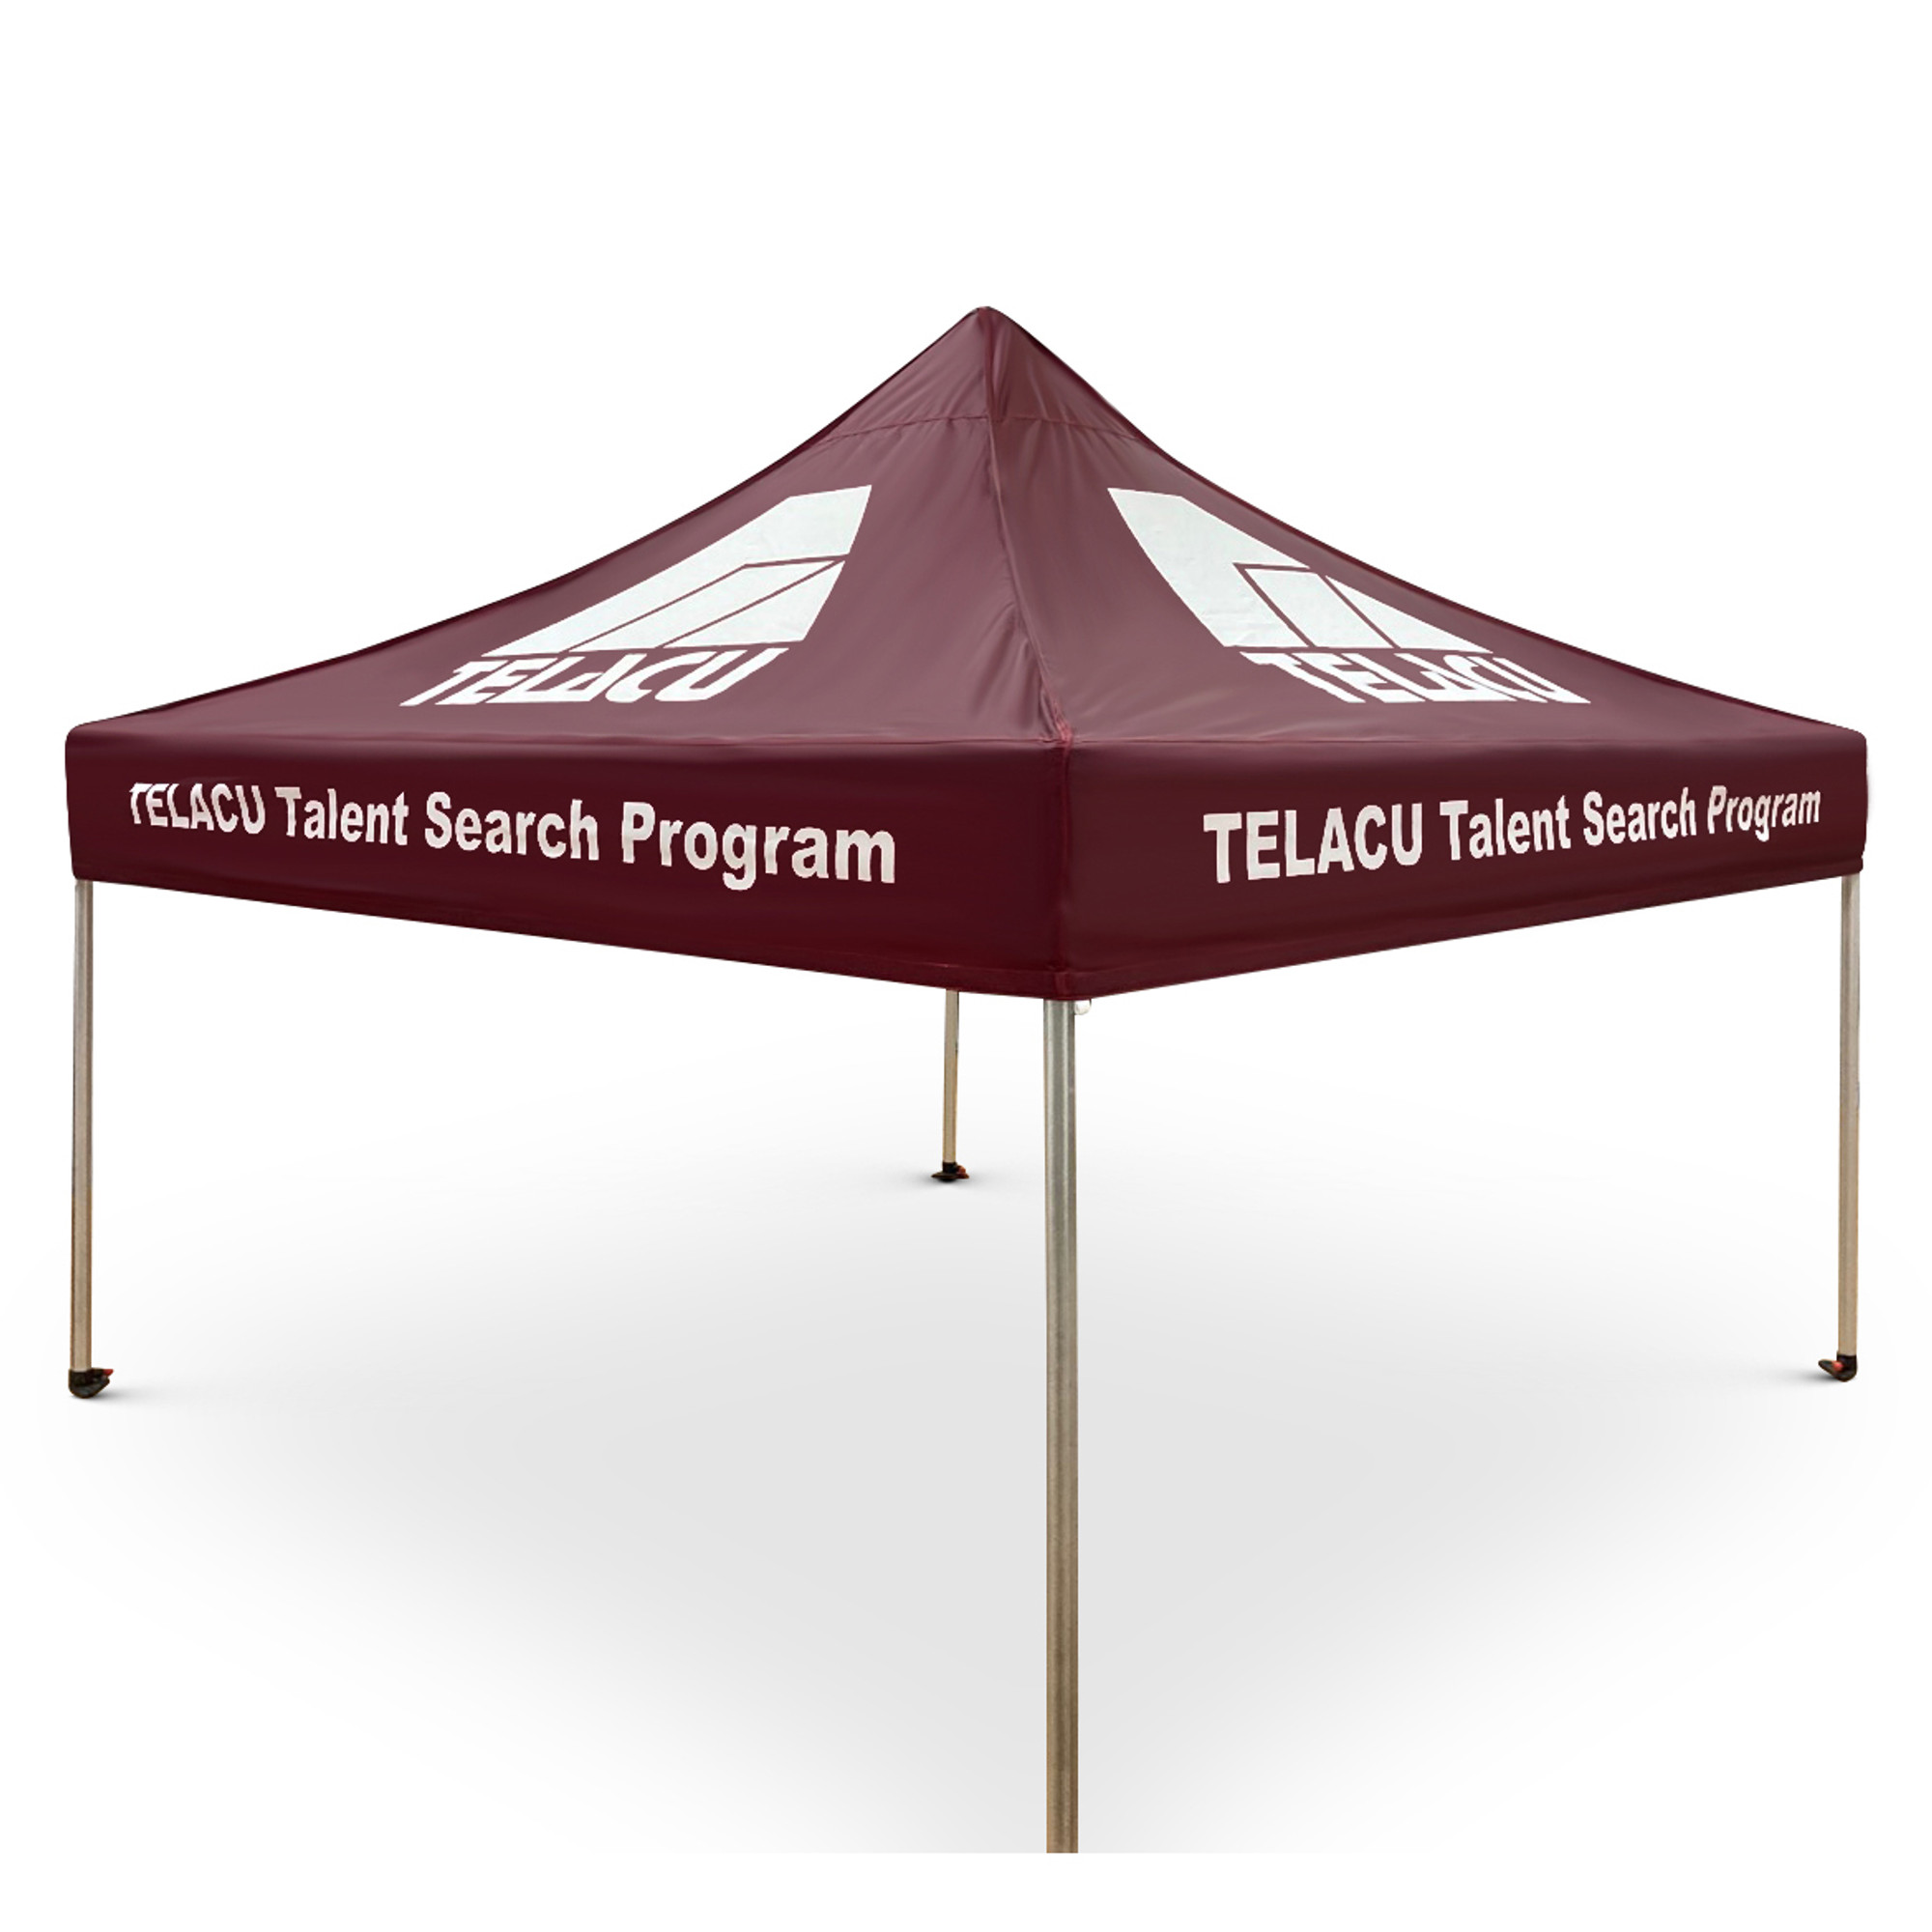 Shop for 10'x10' Custom Canopy Tent at Best Price